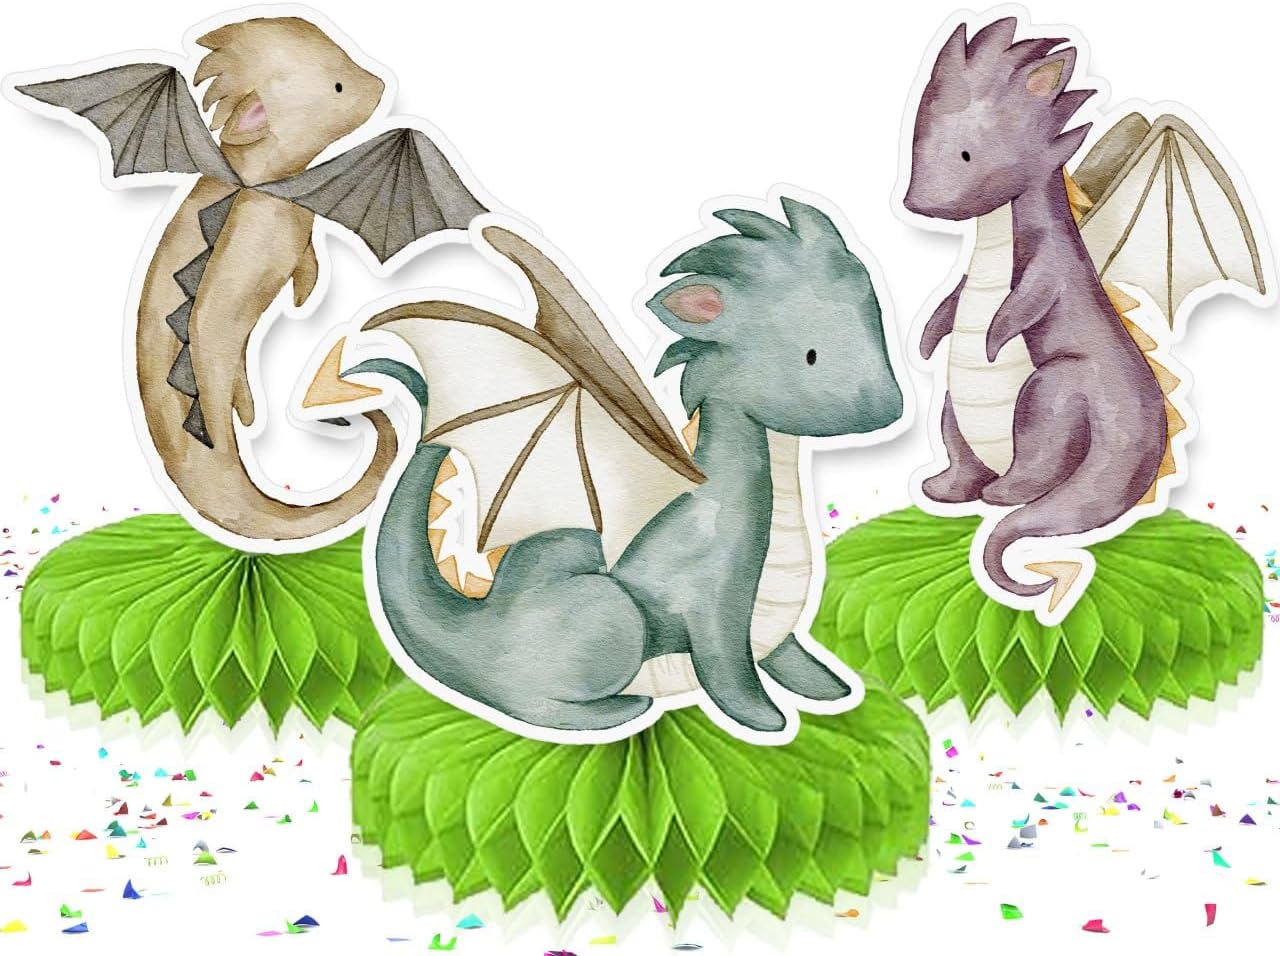 Enchanted Hatchlings - Baby Dragon Honeycomb Centerpieces Set of 5